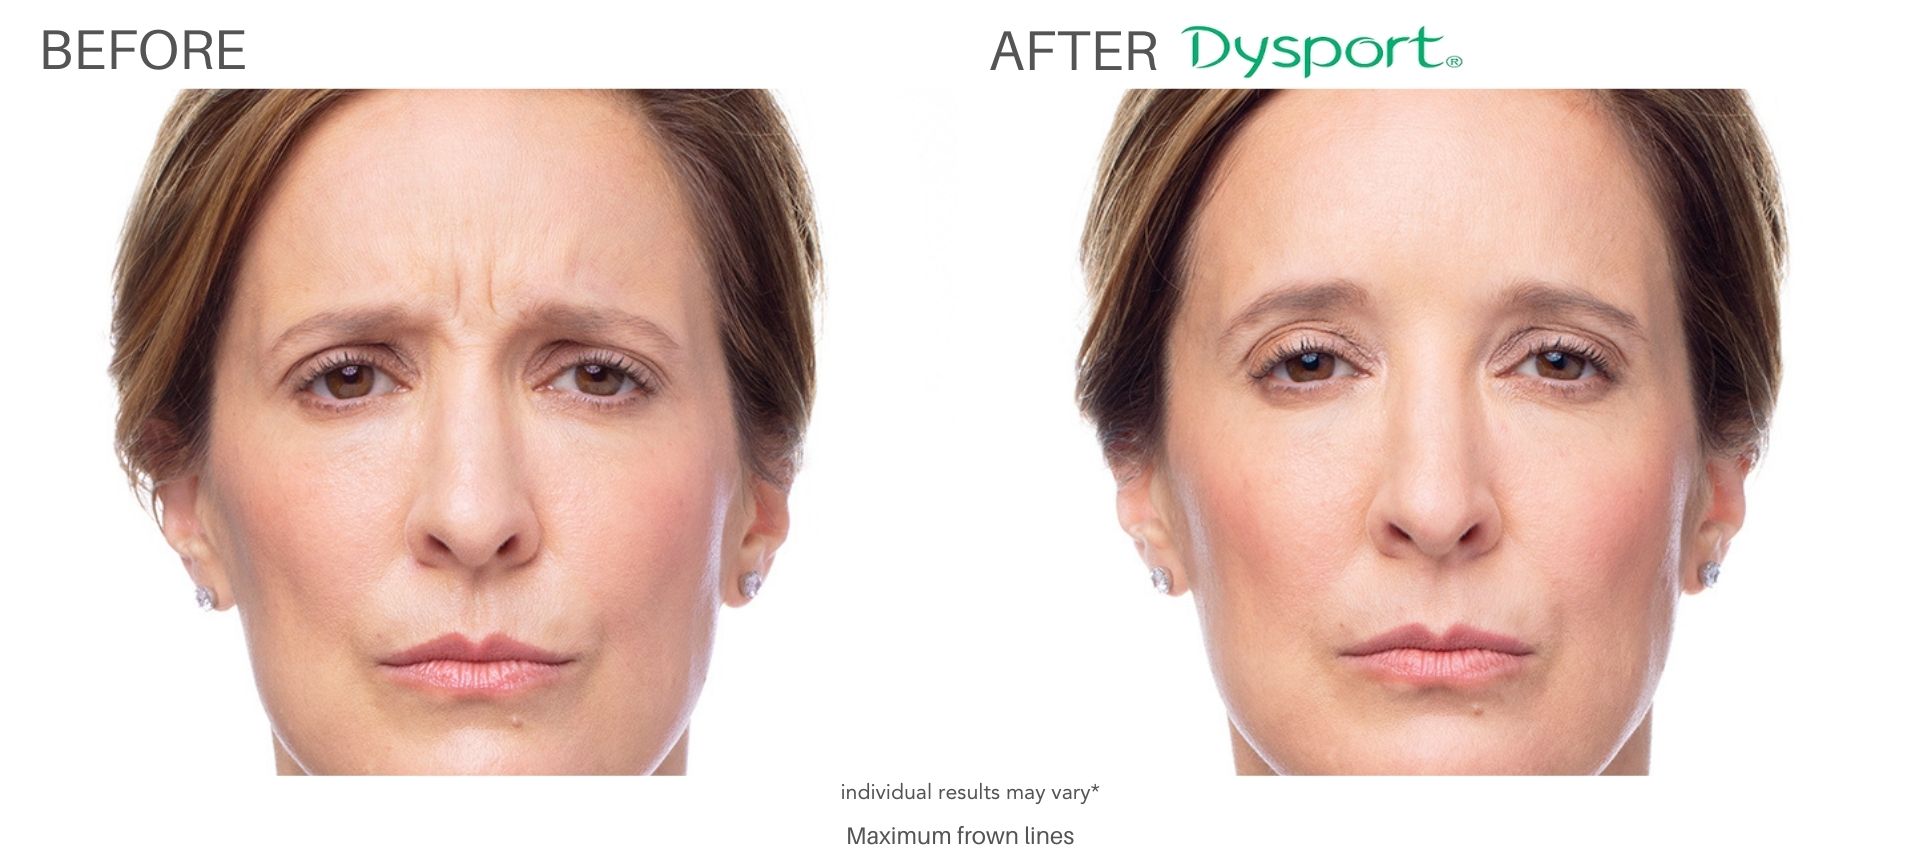 Before & After Dysport